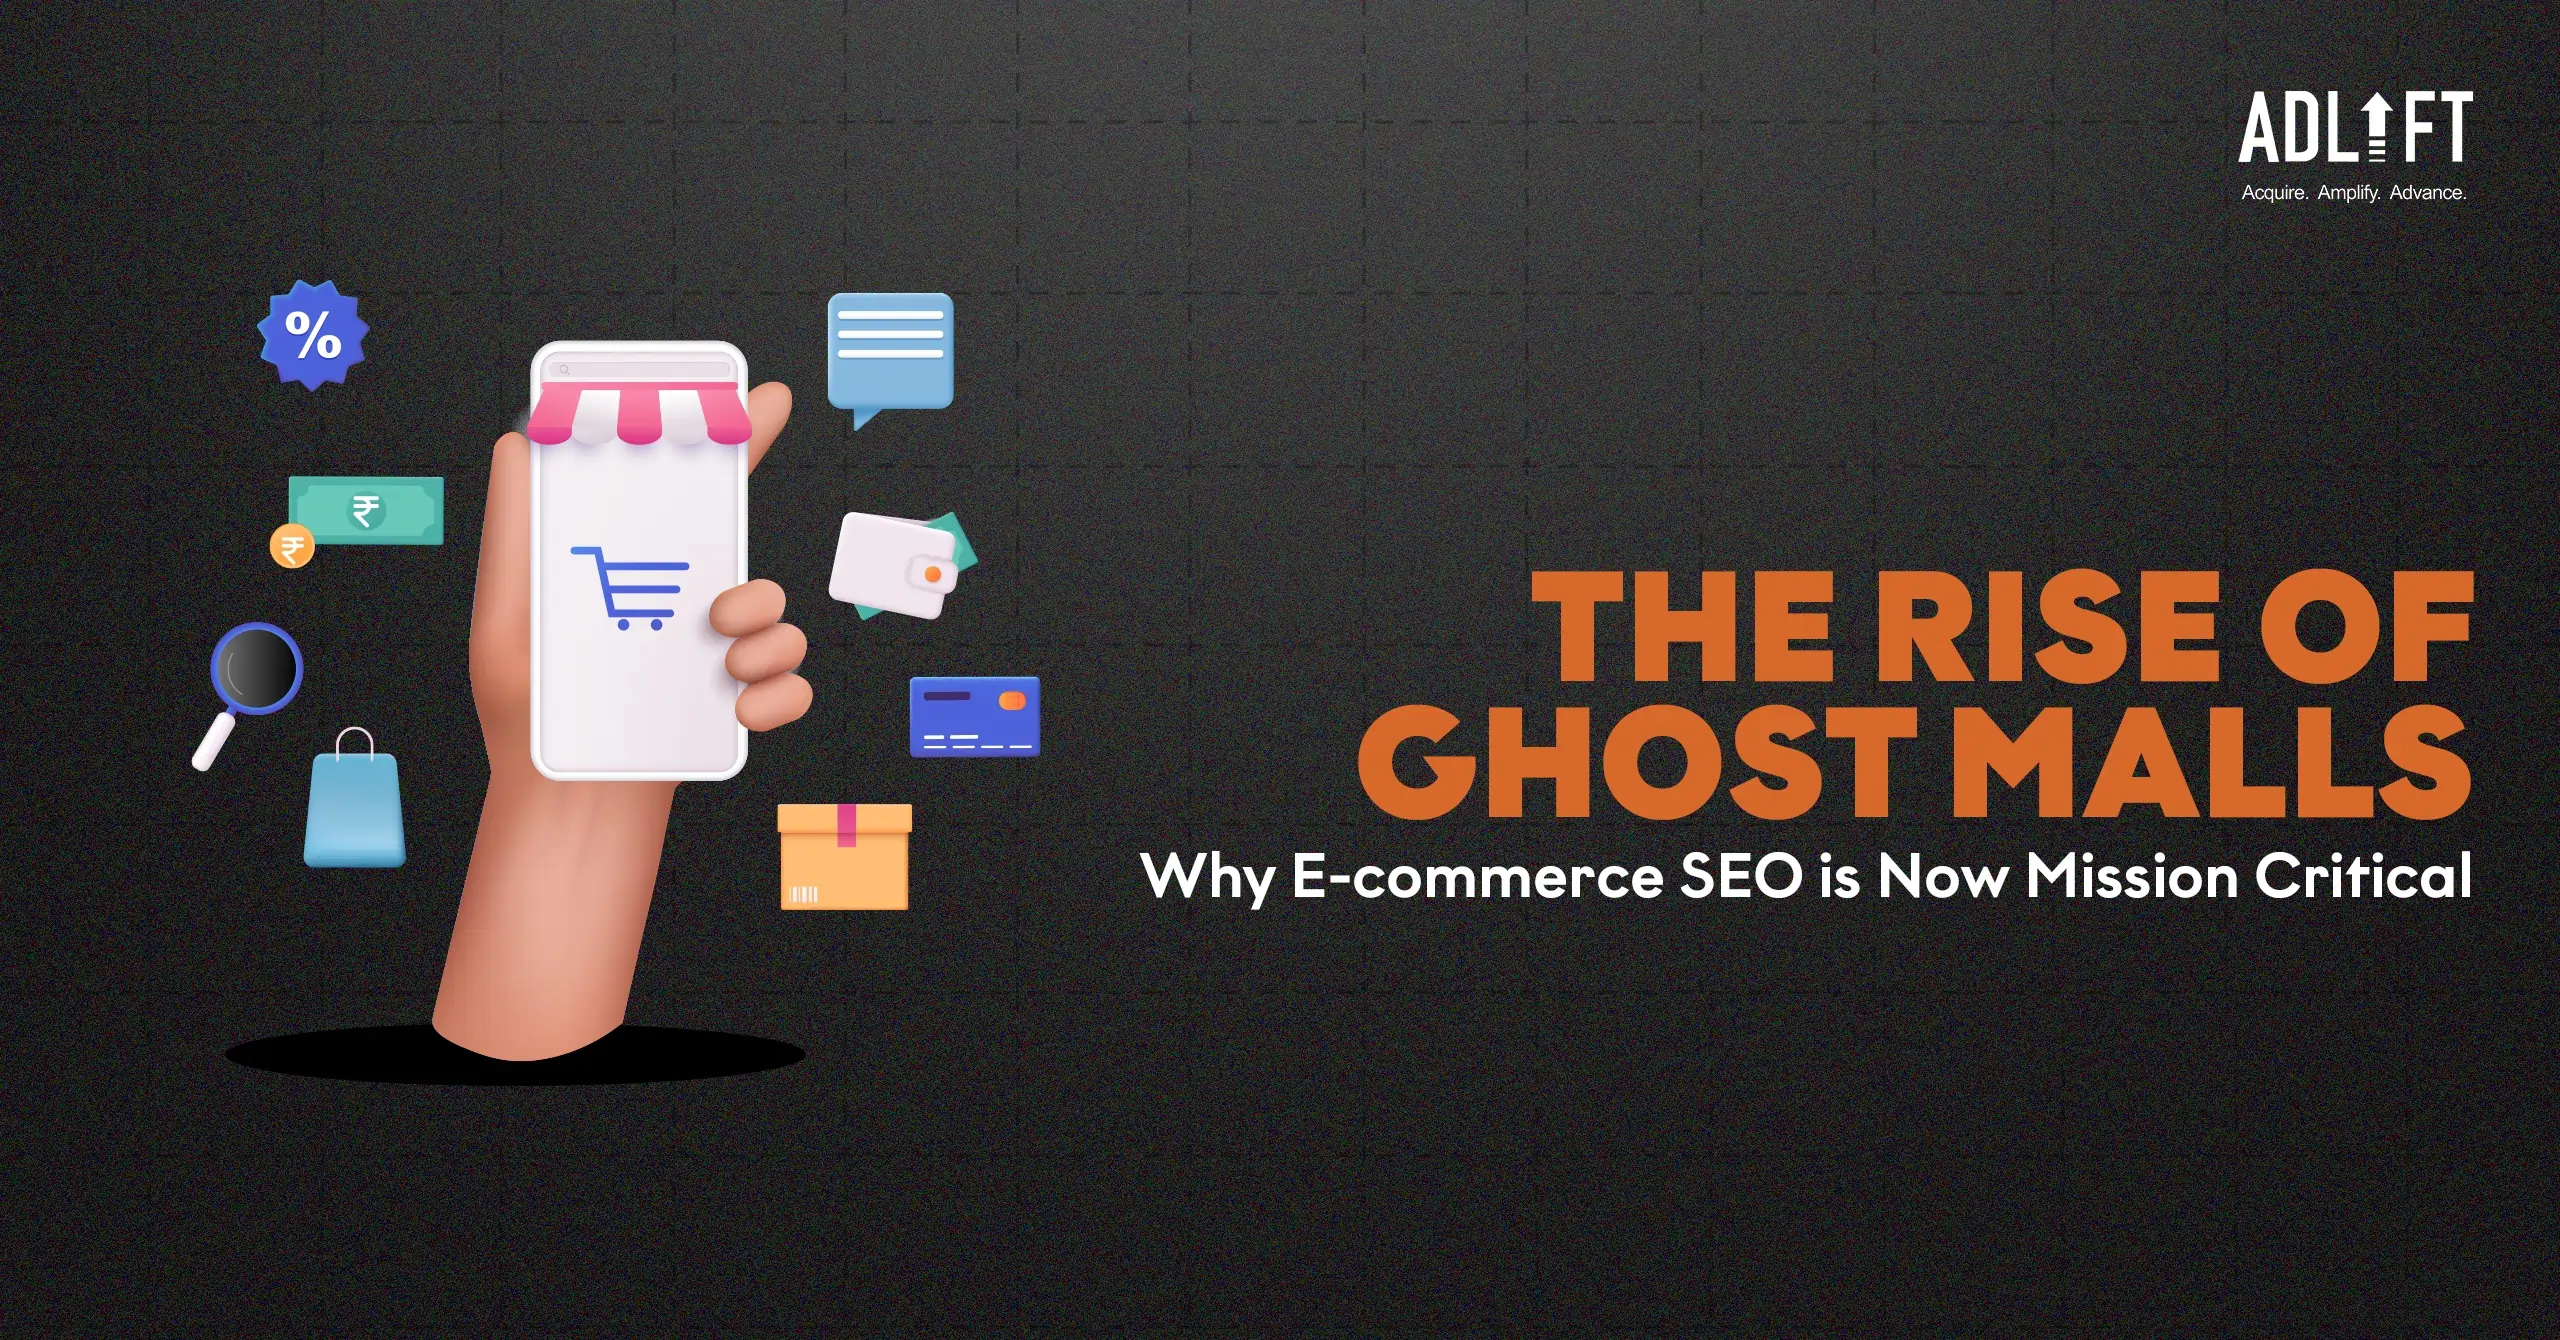 The Rise of Ghost Malls: Why E-commerce SEO is Now Mission-Critical